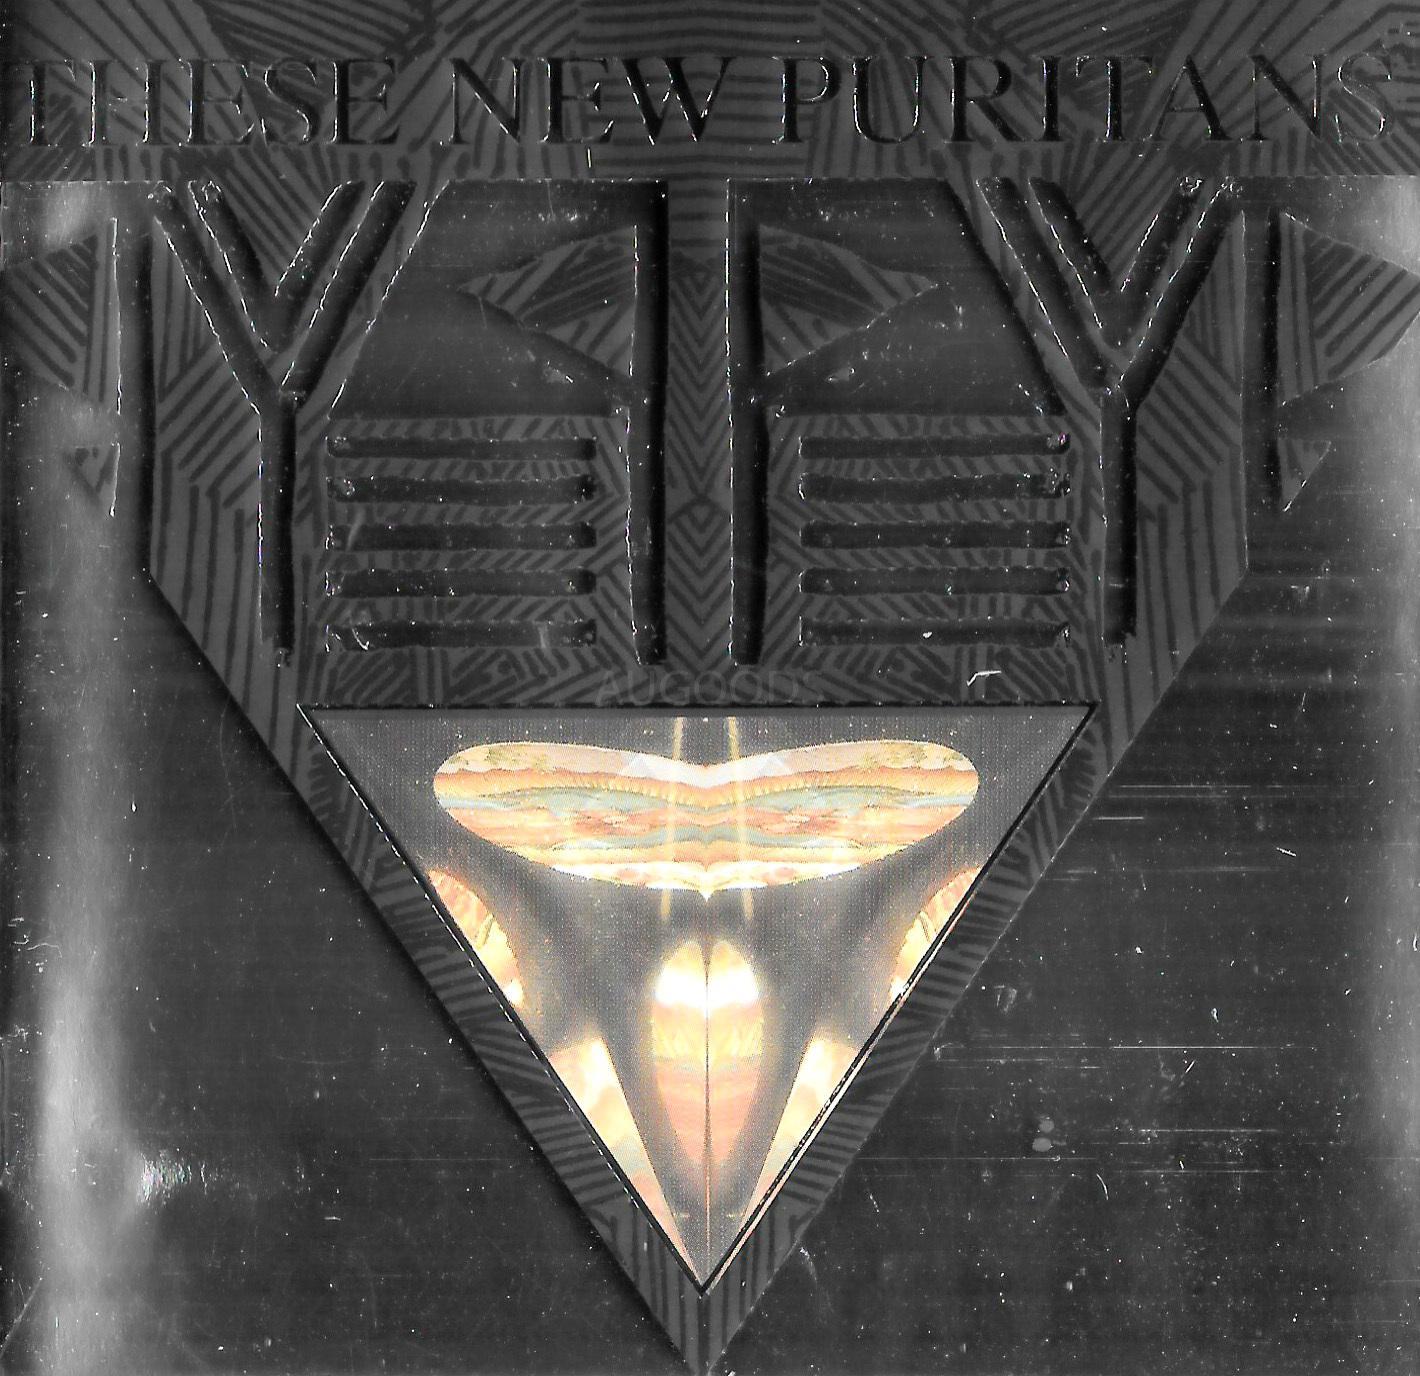 These New Puritans - Beat Pyramid CD